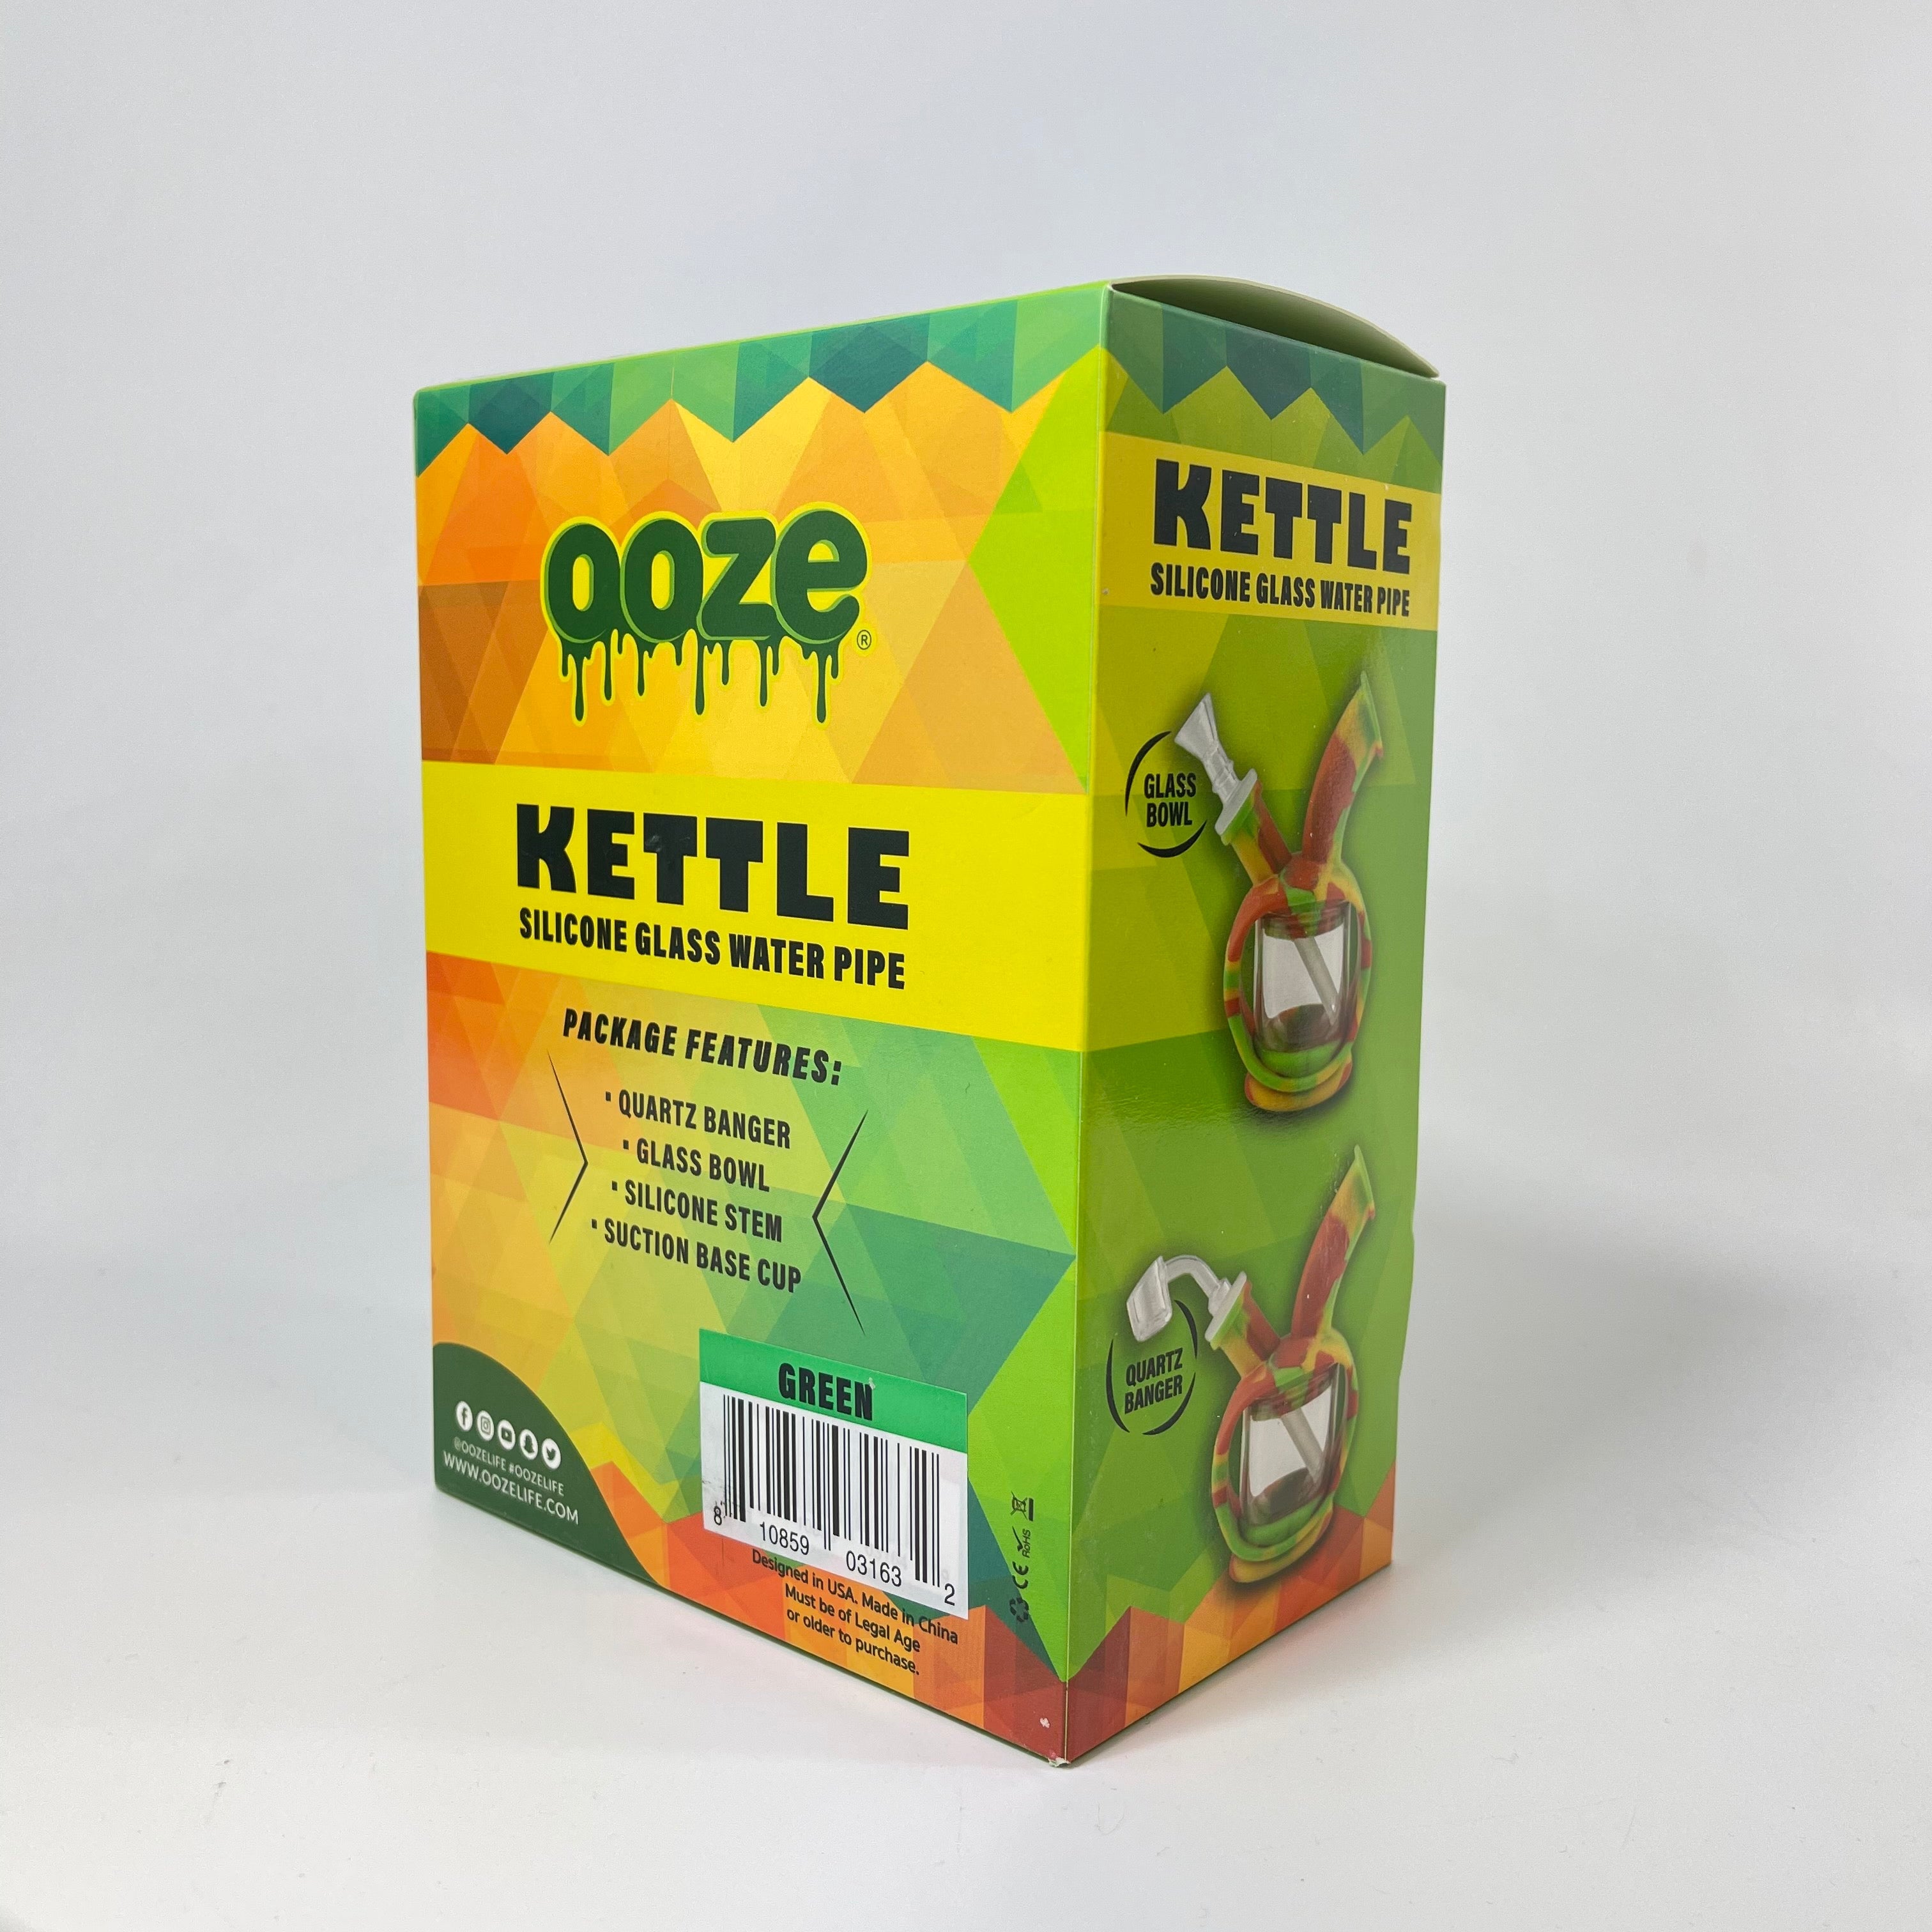 Ooze Kettle - Silicone Glass Waterpipe